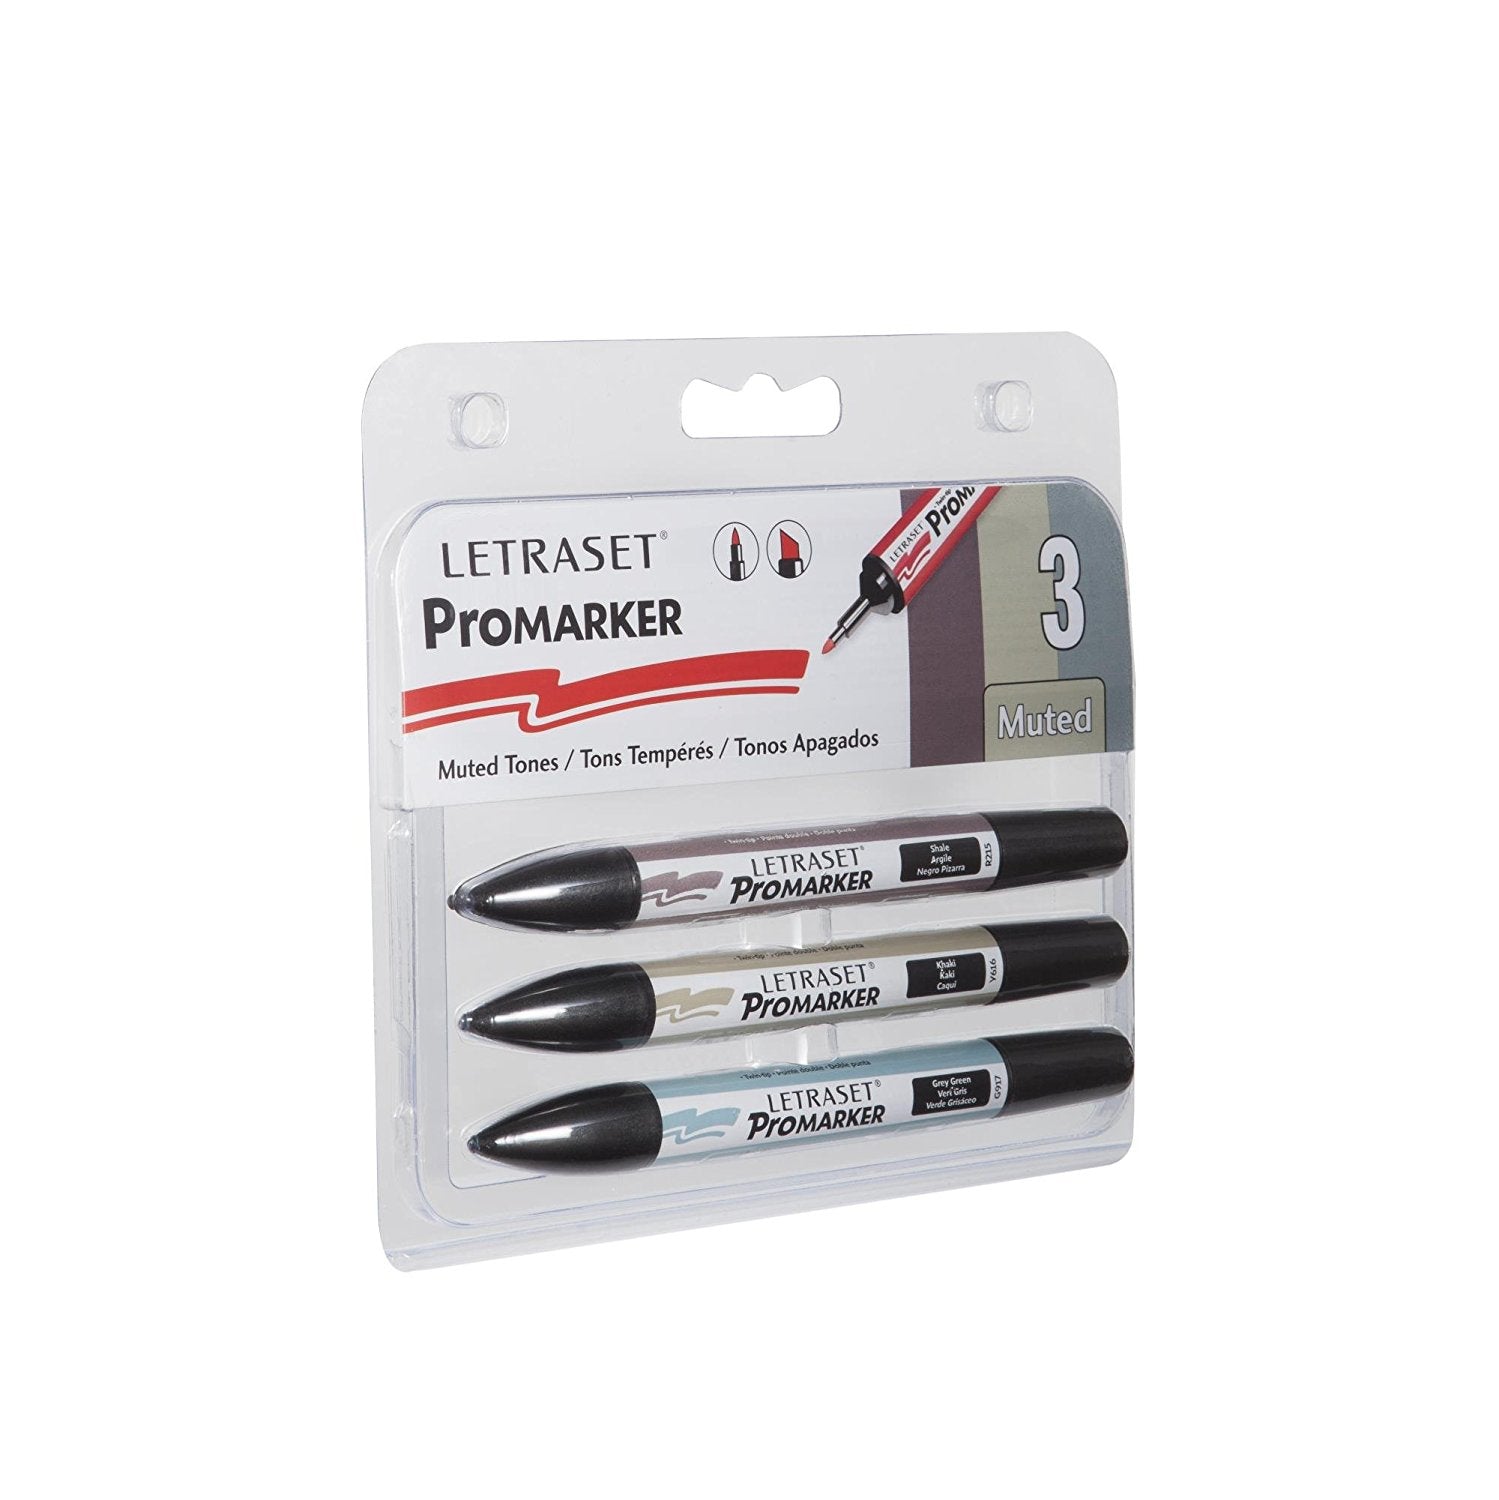 Letraset Muted Tones Pro Marker Set of 3